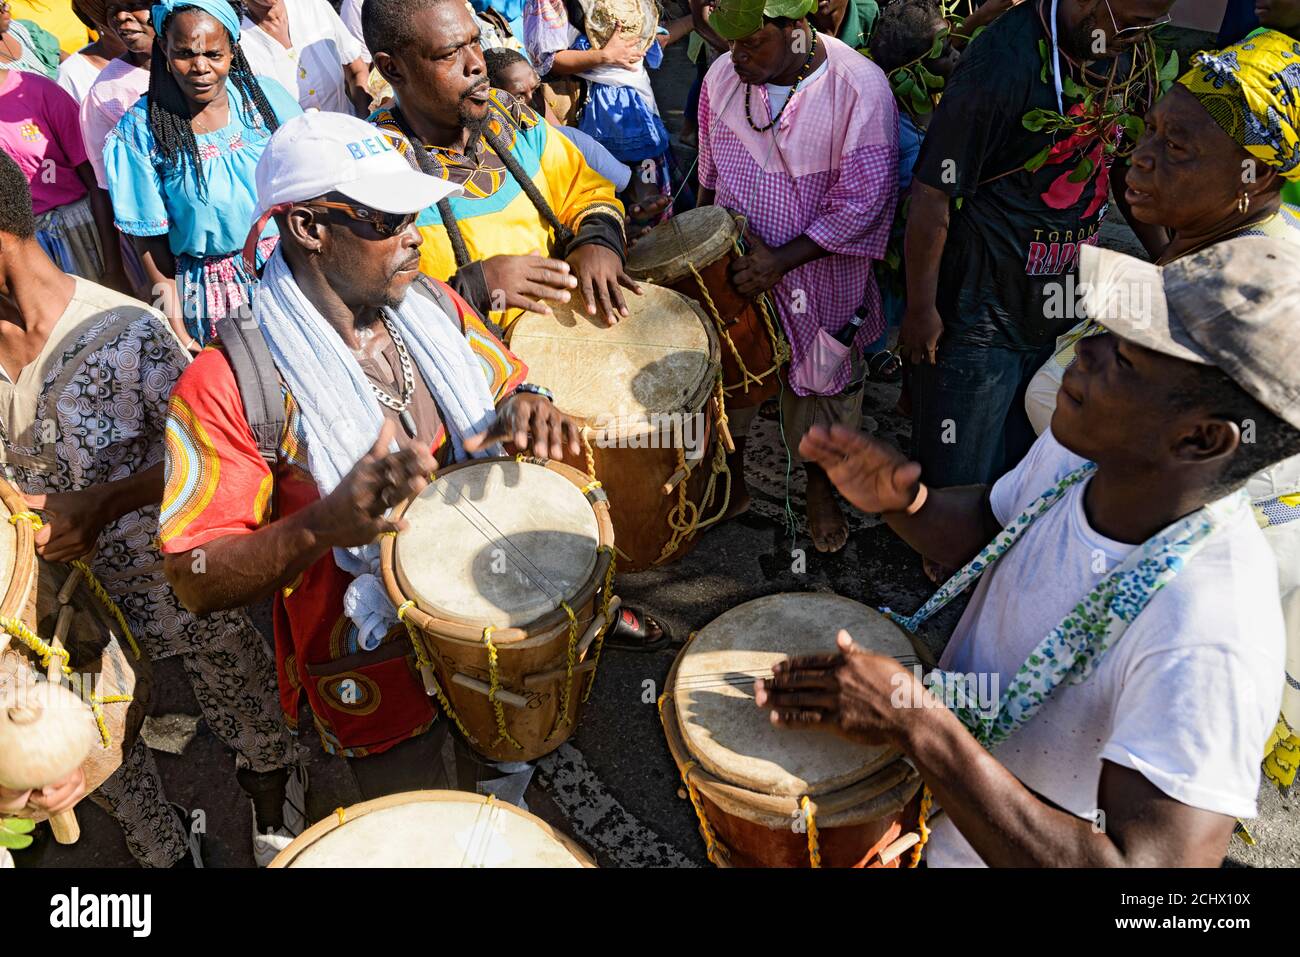 Hopkins Village, Stann Creek District, Belize - November 19, 2019: Garifuna Settlement Day re-enactment and celebration at Hopkins Village. An annual event that marks the arrival of the Garifuna people into Belize. Stock Photo